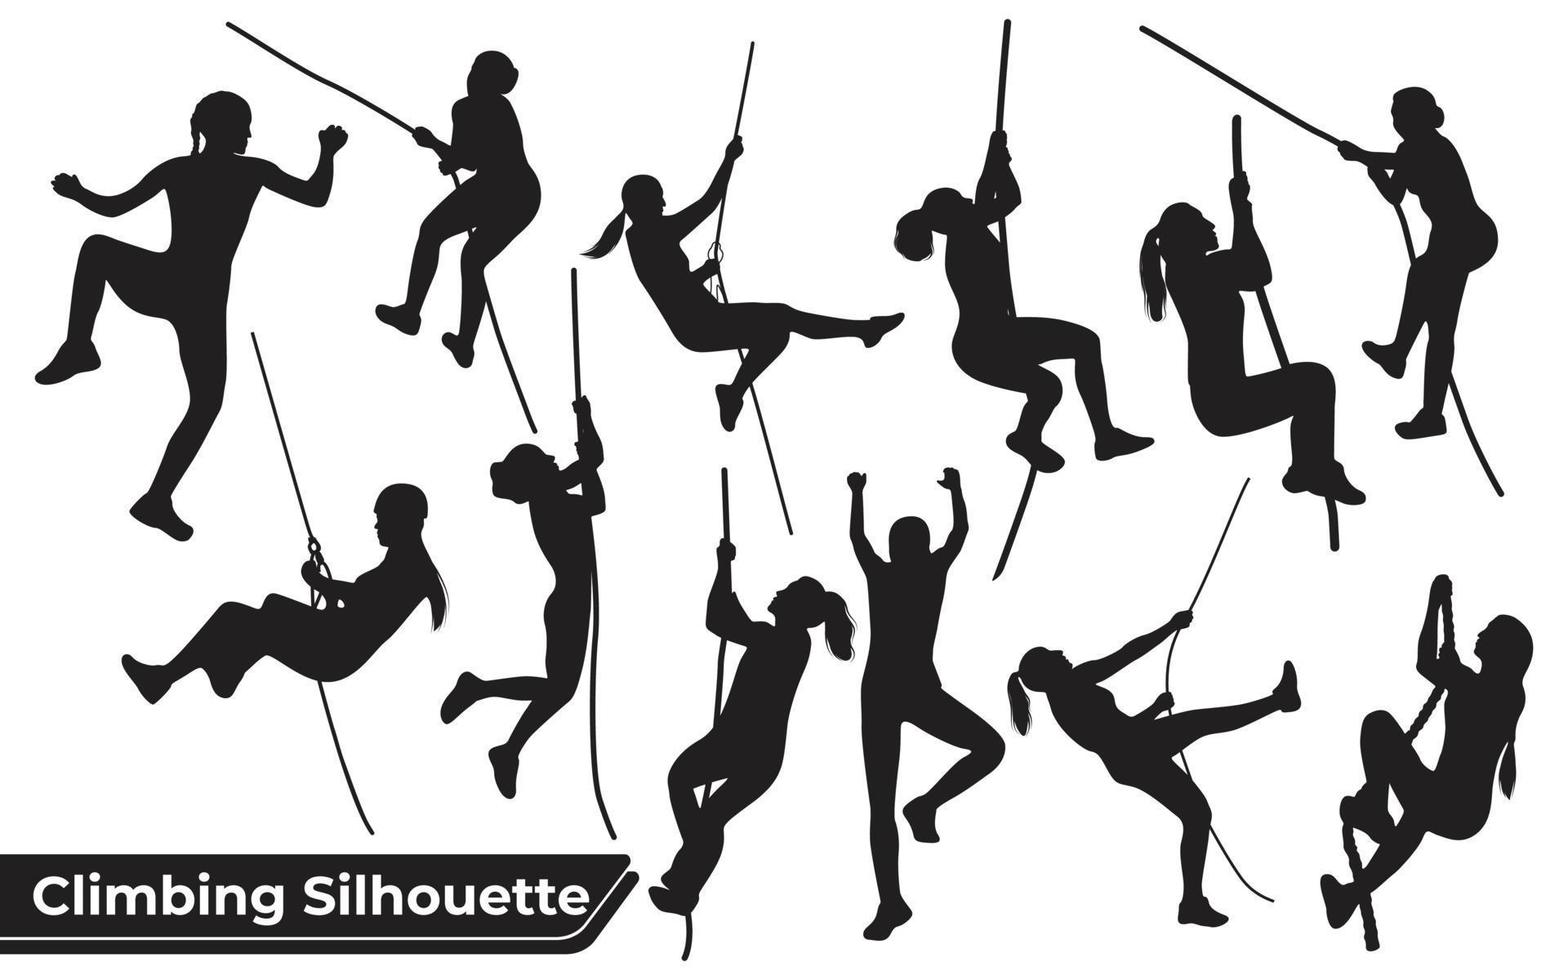 Collection of Climbing in mountains silhouettes in different poses vector